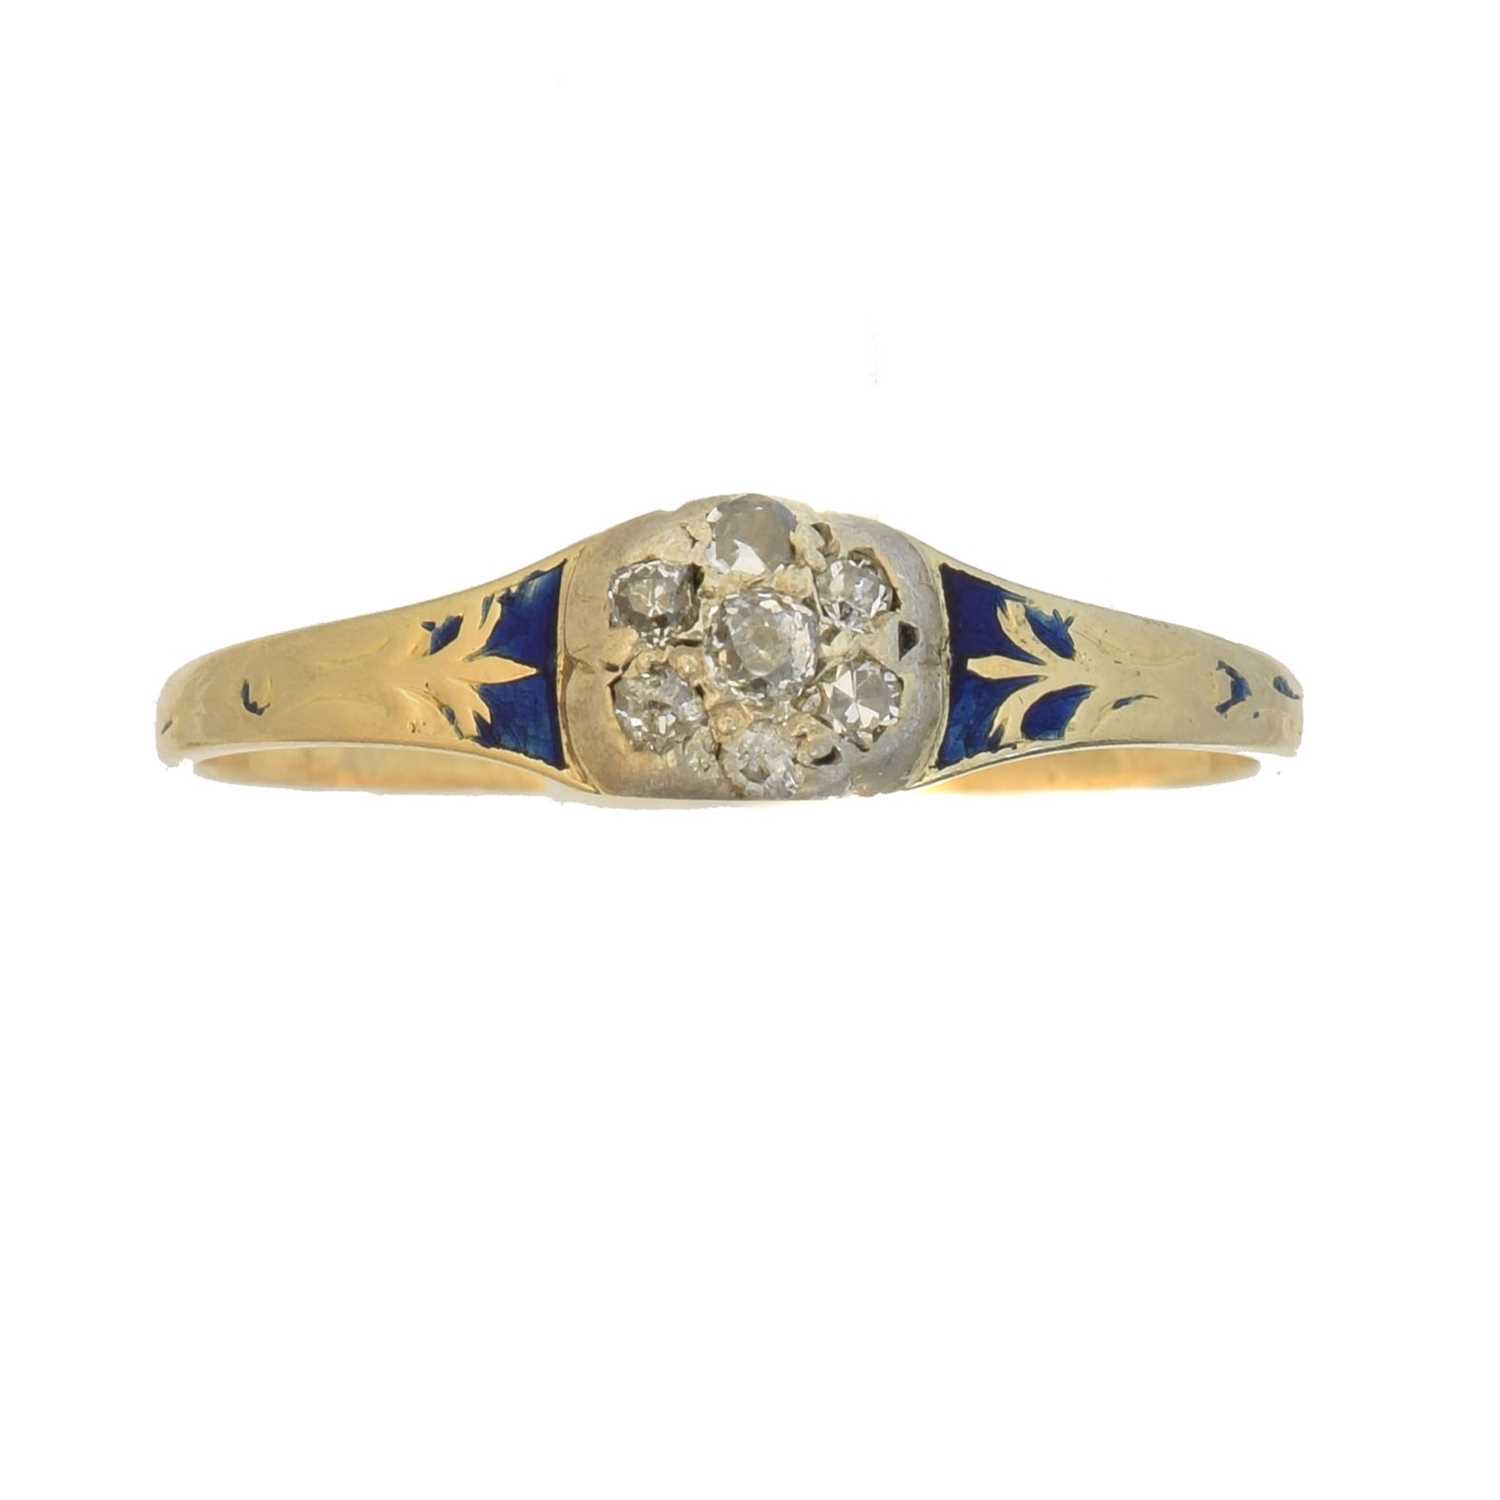 Lot 64 - A 19th century diamond and enamel cluster ring